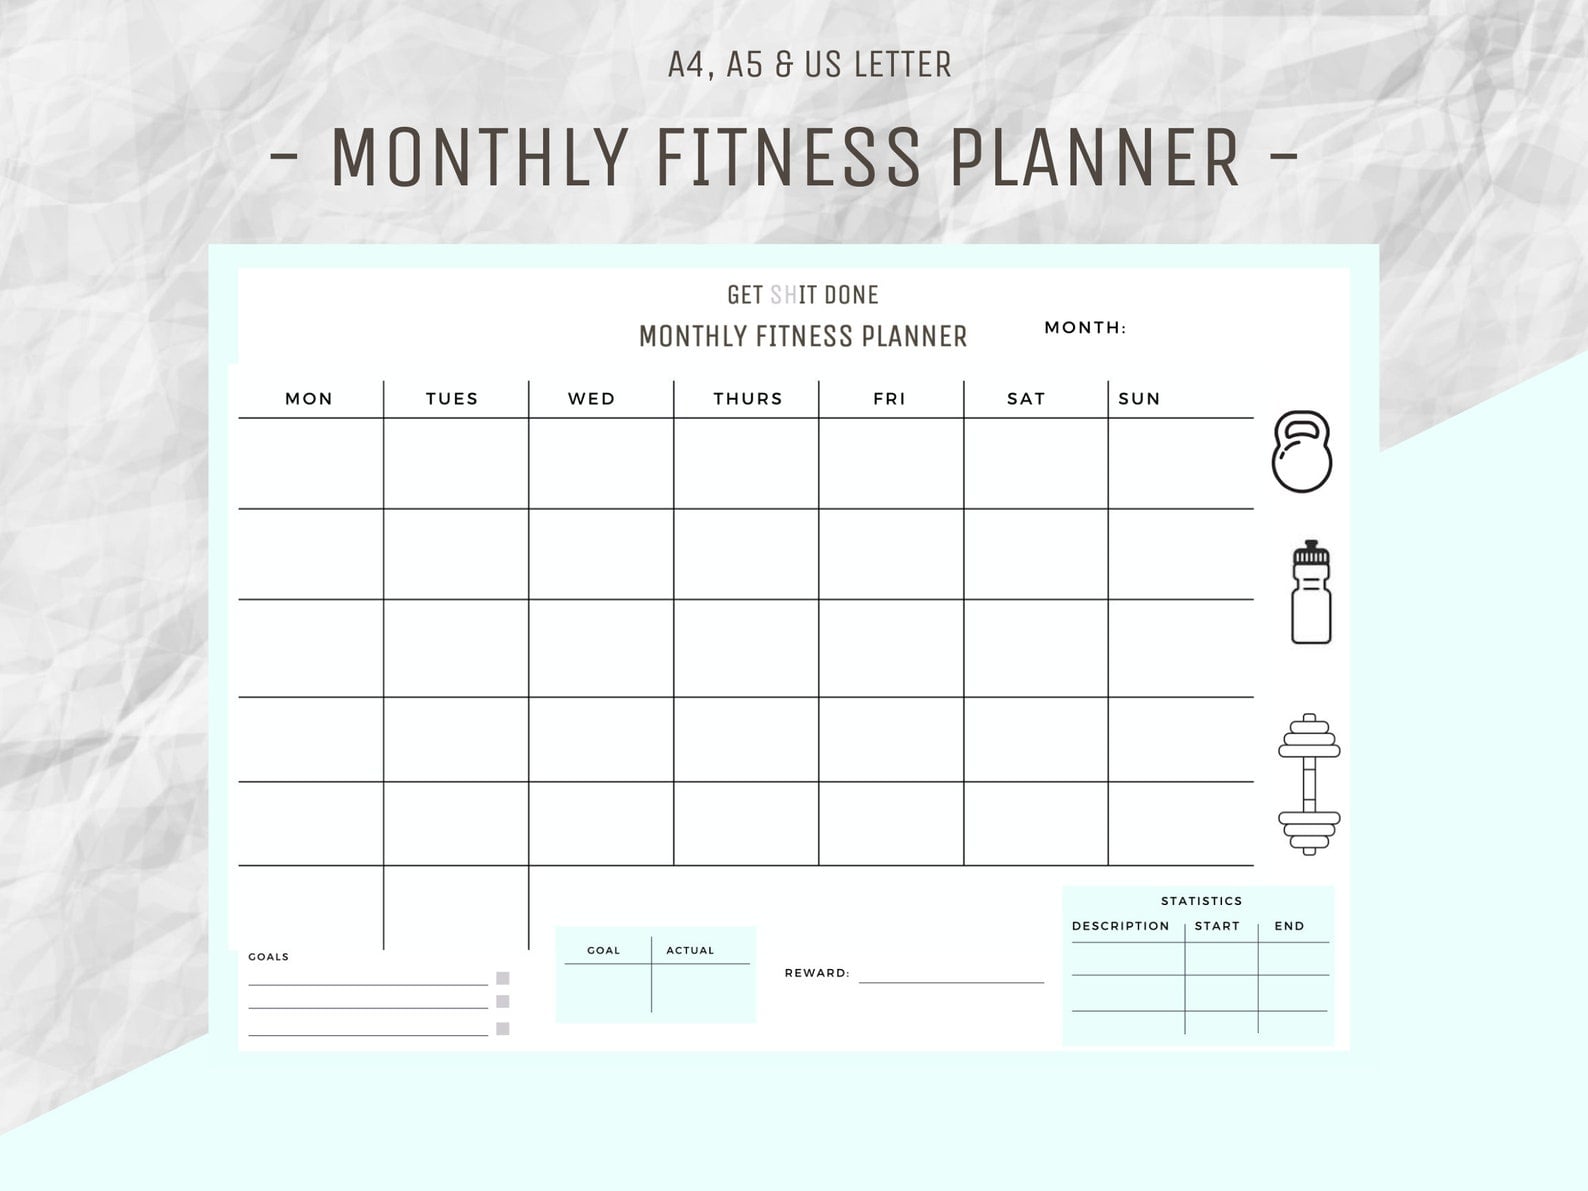 Paper & Party Supplies Fitness Planner Printable Bundle Goal Setting